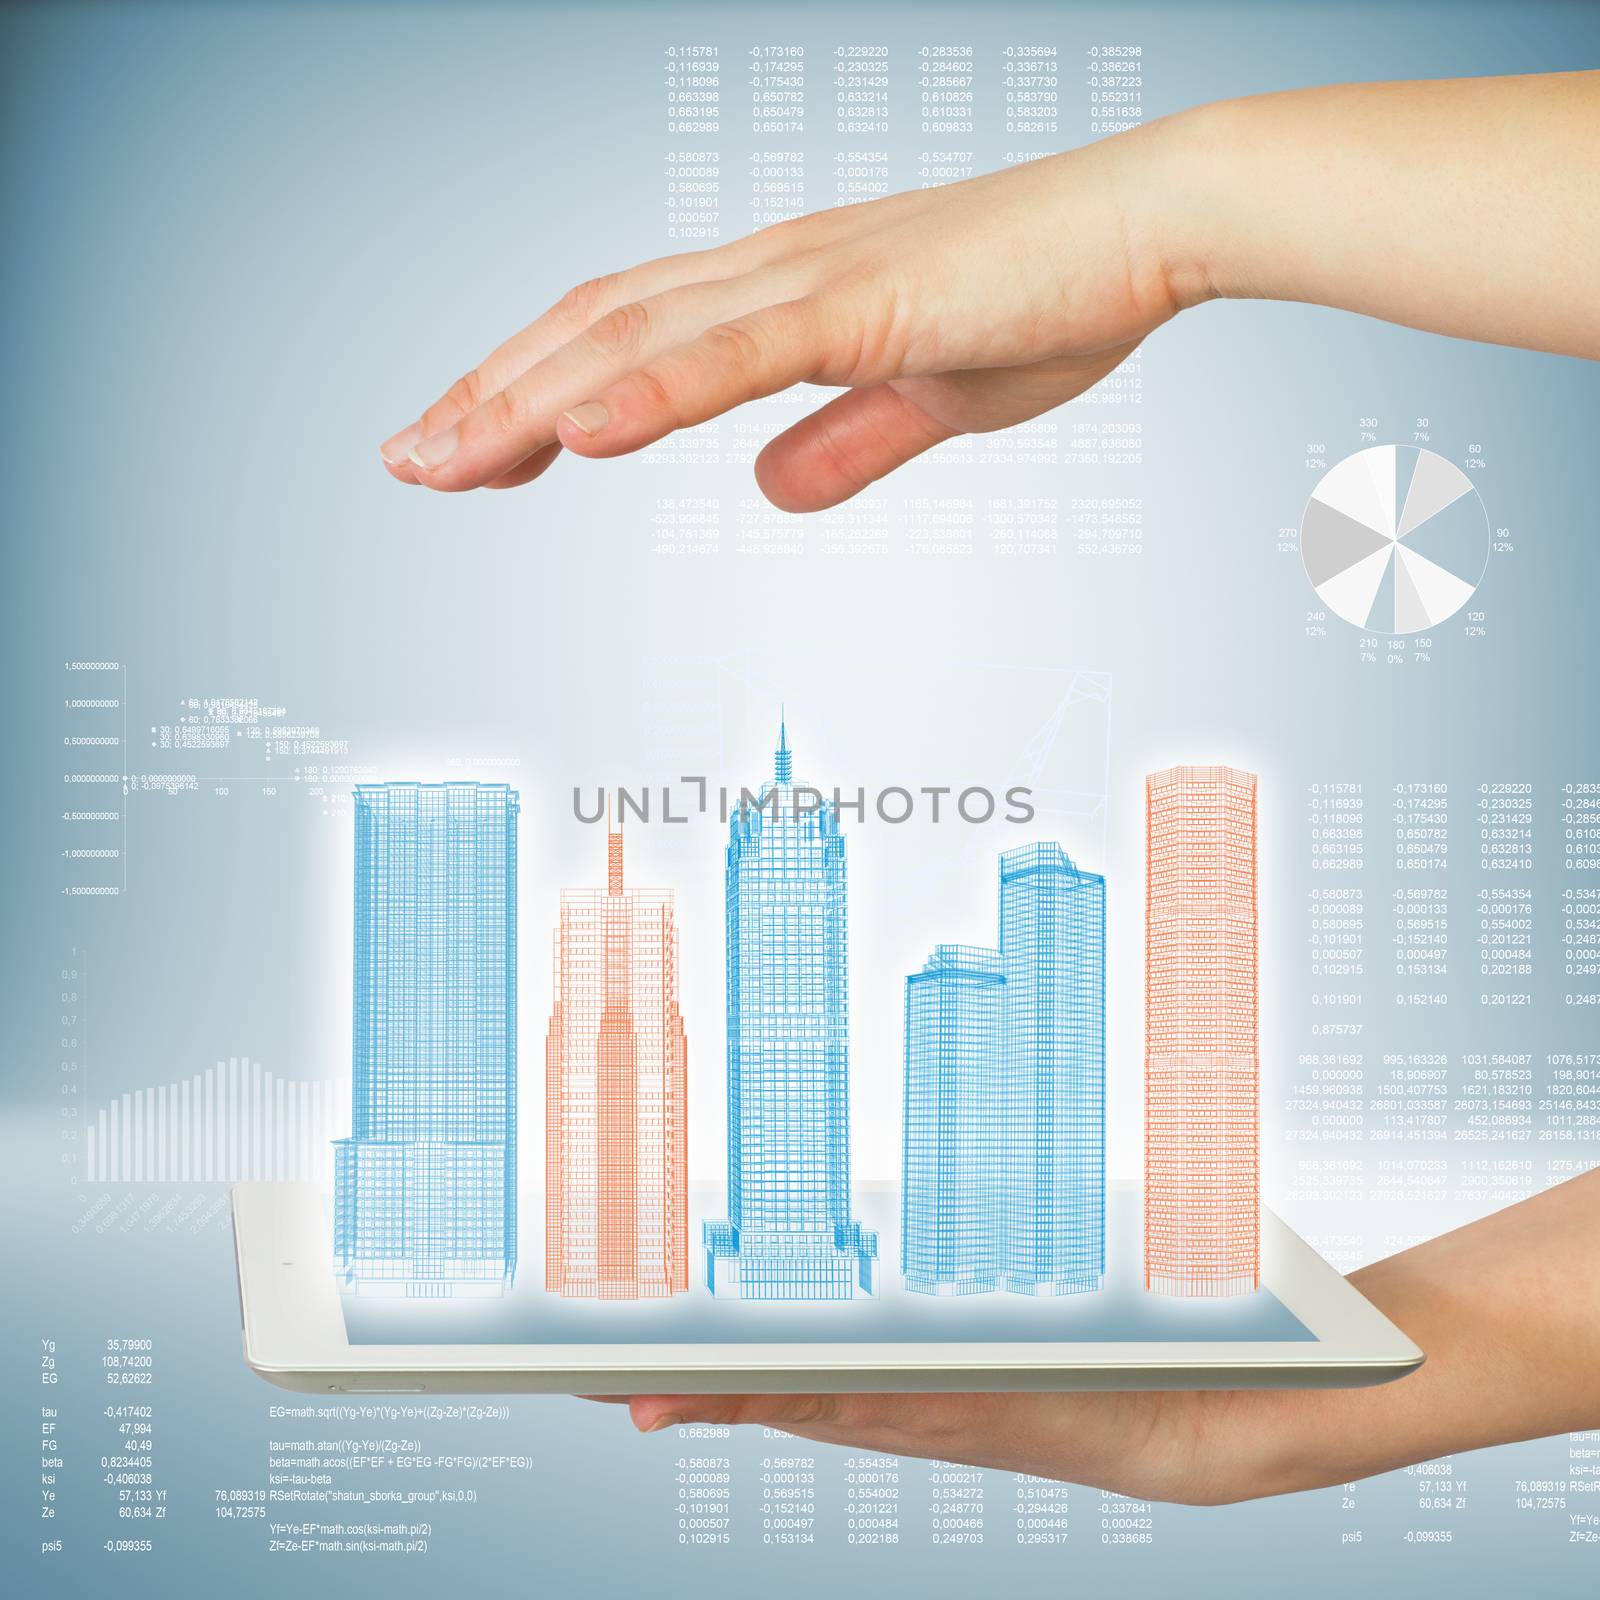 Hands holding a tablet computer. In screen tablet city of skyscrapers